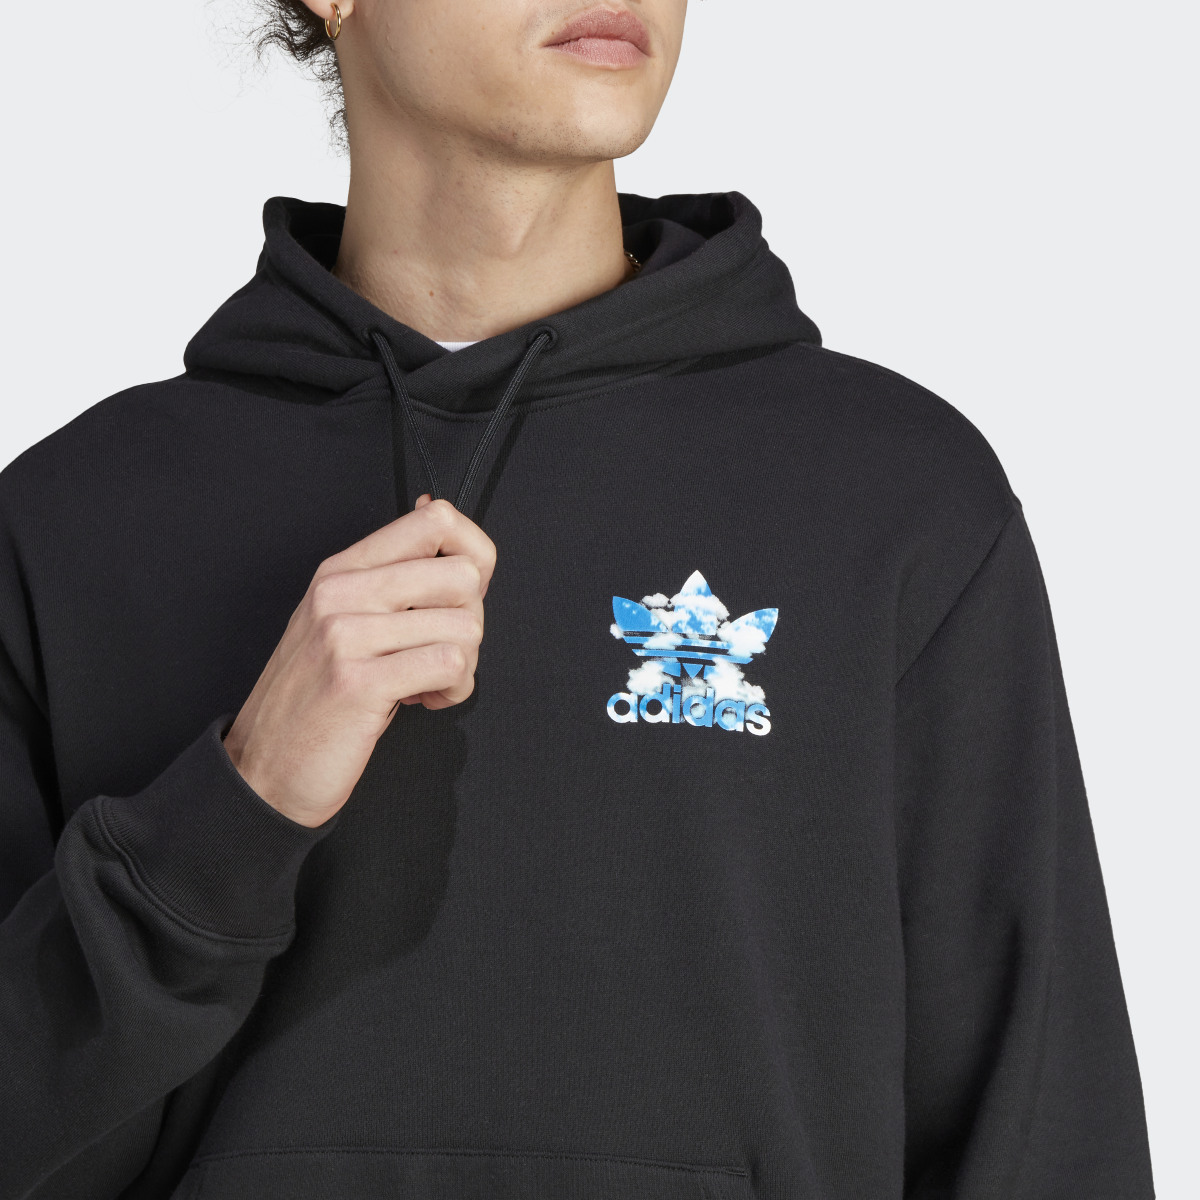 Adidas Graphics Cloudy Trefoil Hoodie. 6